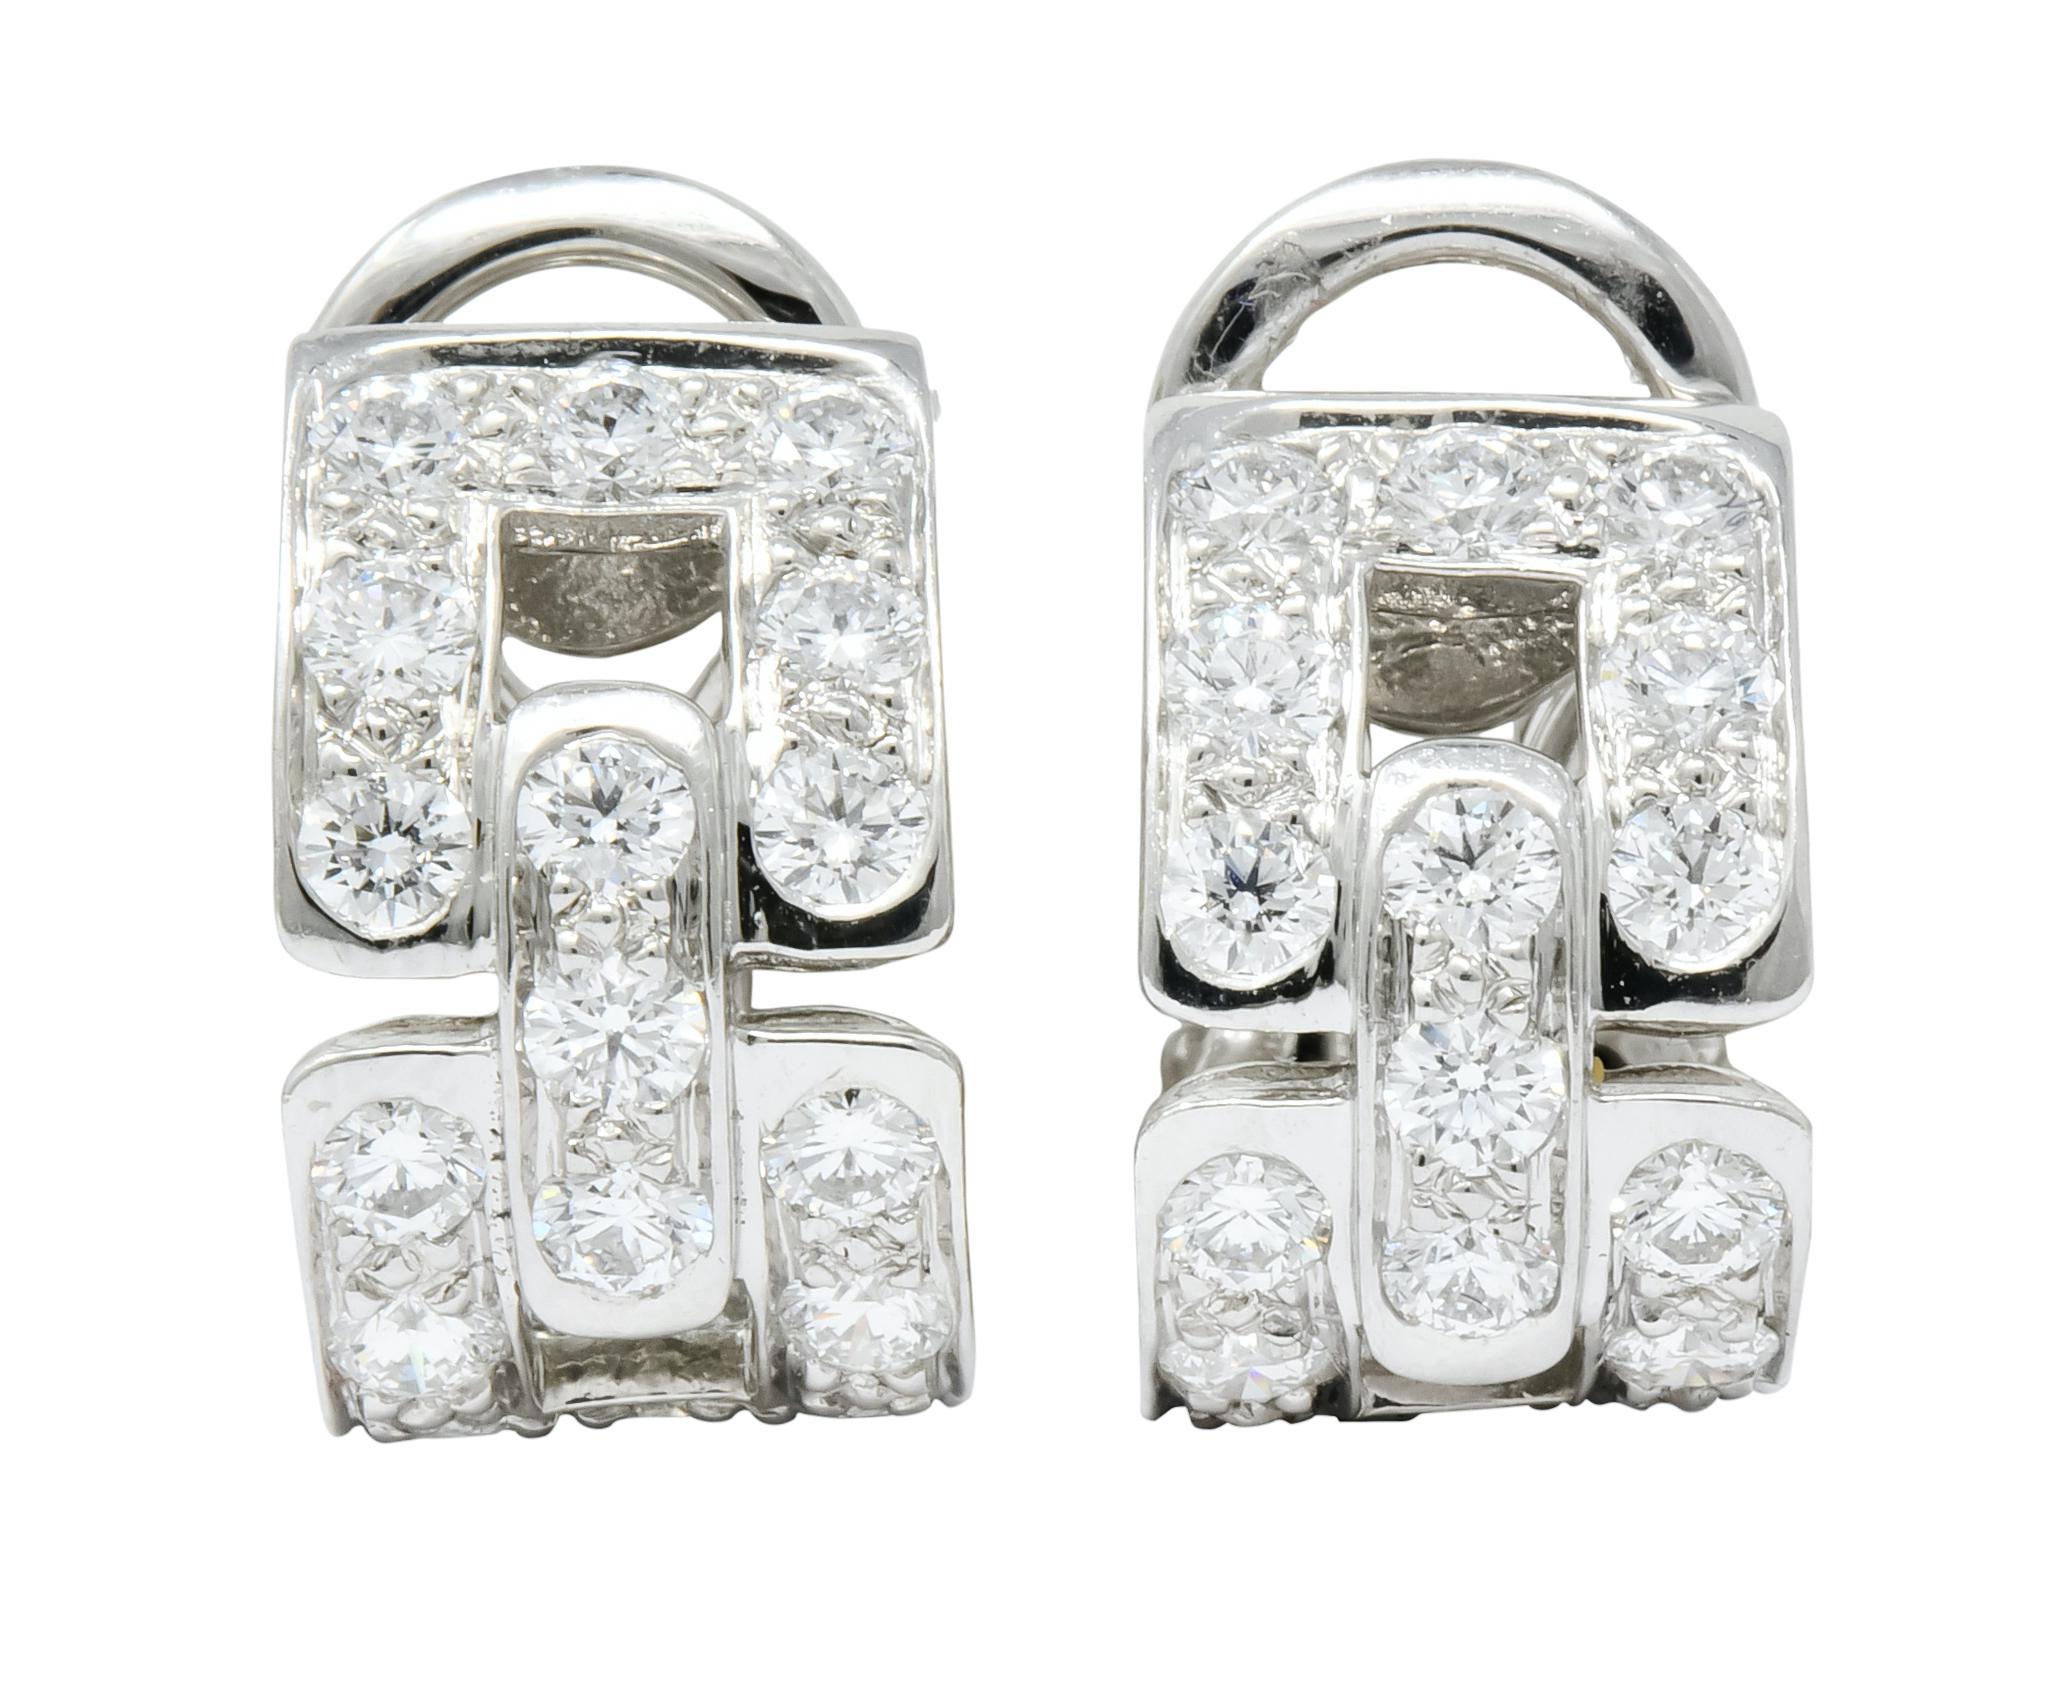 J hoop style earrings designed as pierced chain link motif

Set throughout with round brilliant cut diamonds weighing approximately 1.60 carats total, G/H color and VS clarity

Completed by post and hinged omega backs

Fully signed Tiffany & Co. and